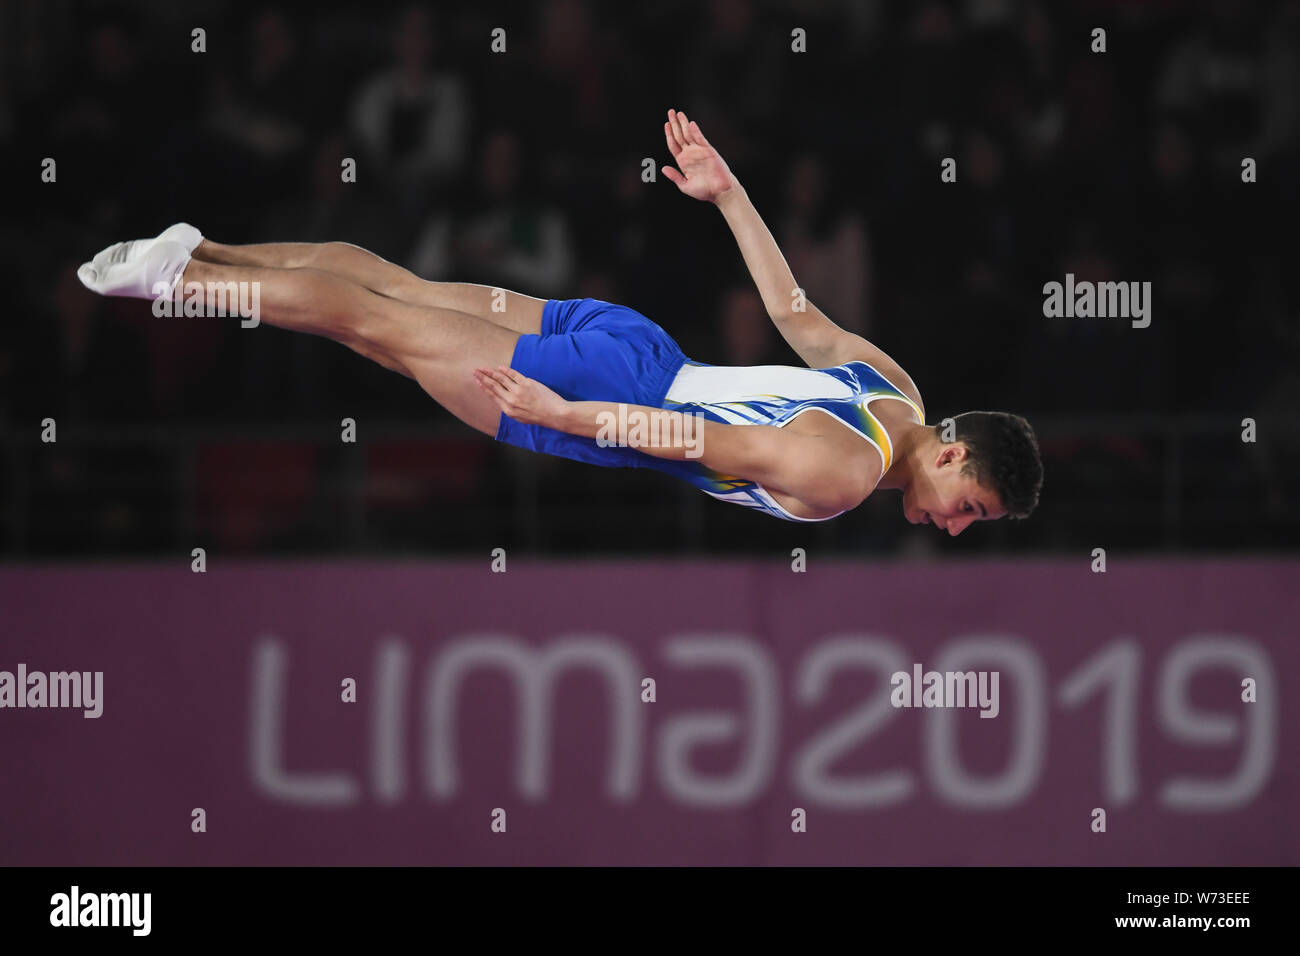 Lima, Peru. 4th Aug, 2019. RAYAN DUTRA from Brazil flips upside down during the competition held in the Polideportivo Villa El Salvador in Lima, Peru. Credit: Amy Sanderson/ZUMA Wire/Alamy Live News Stock Photo